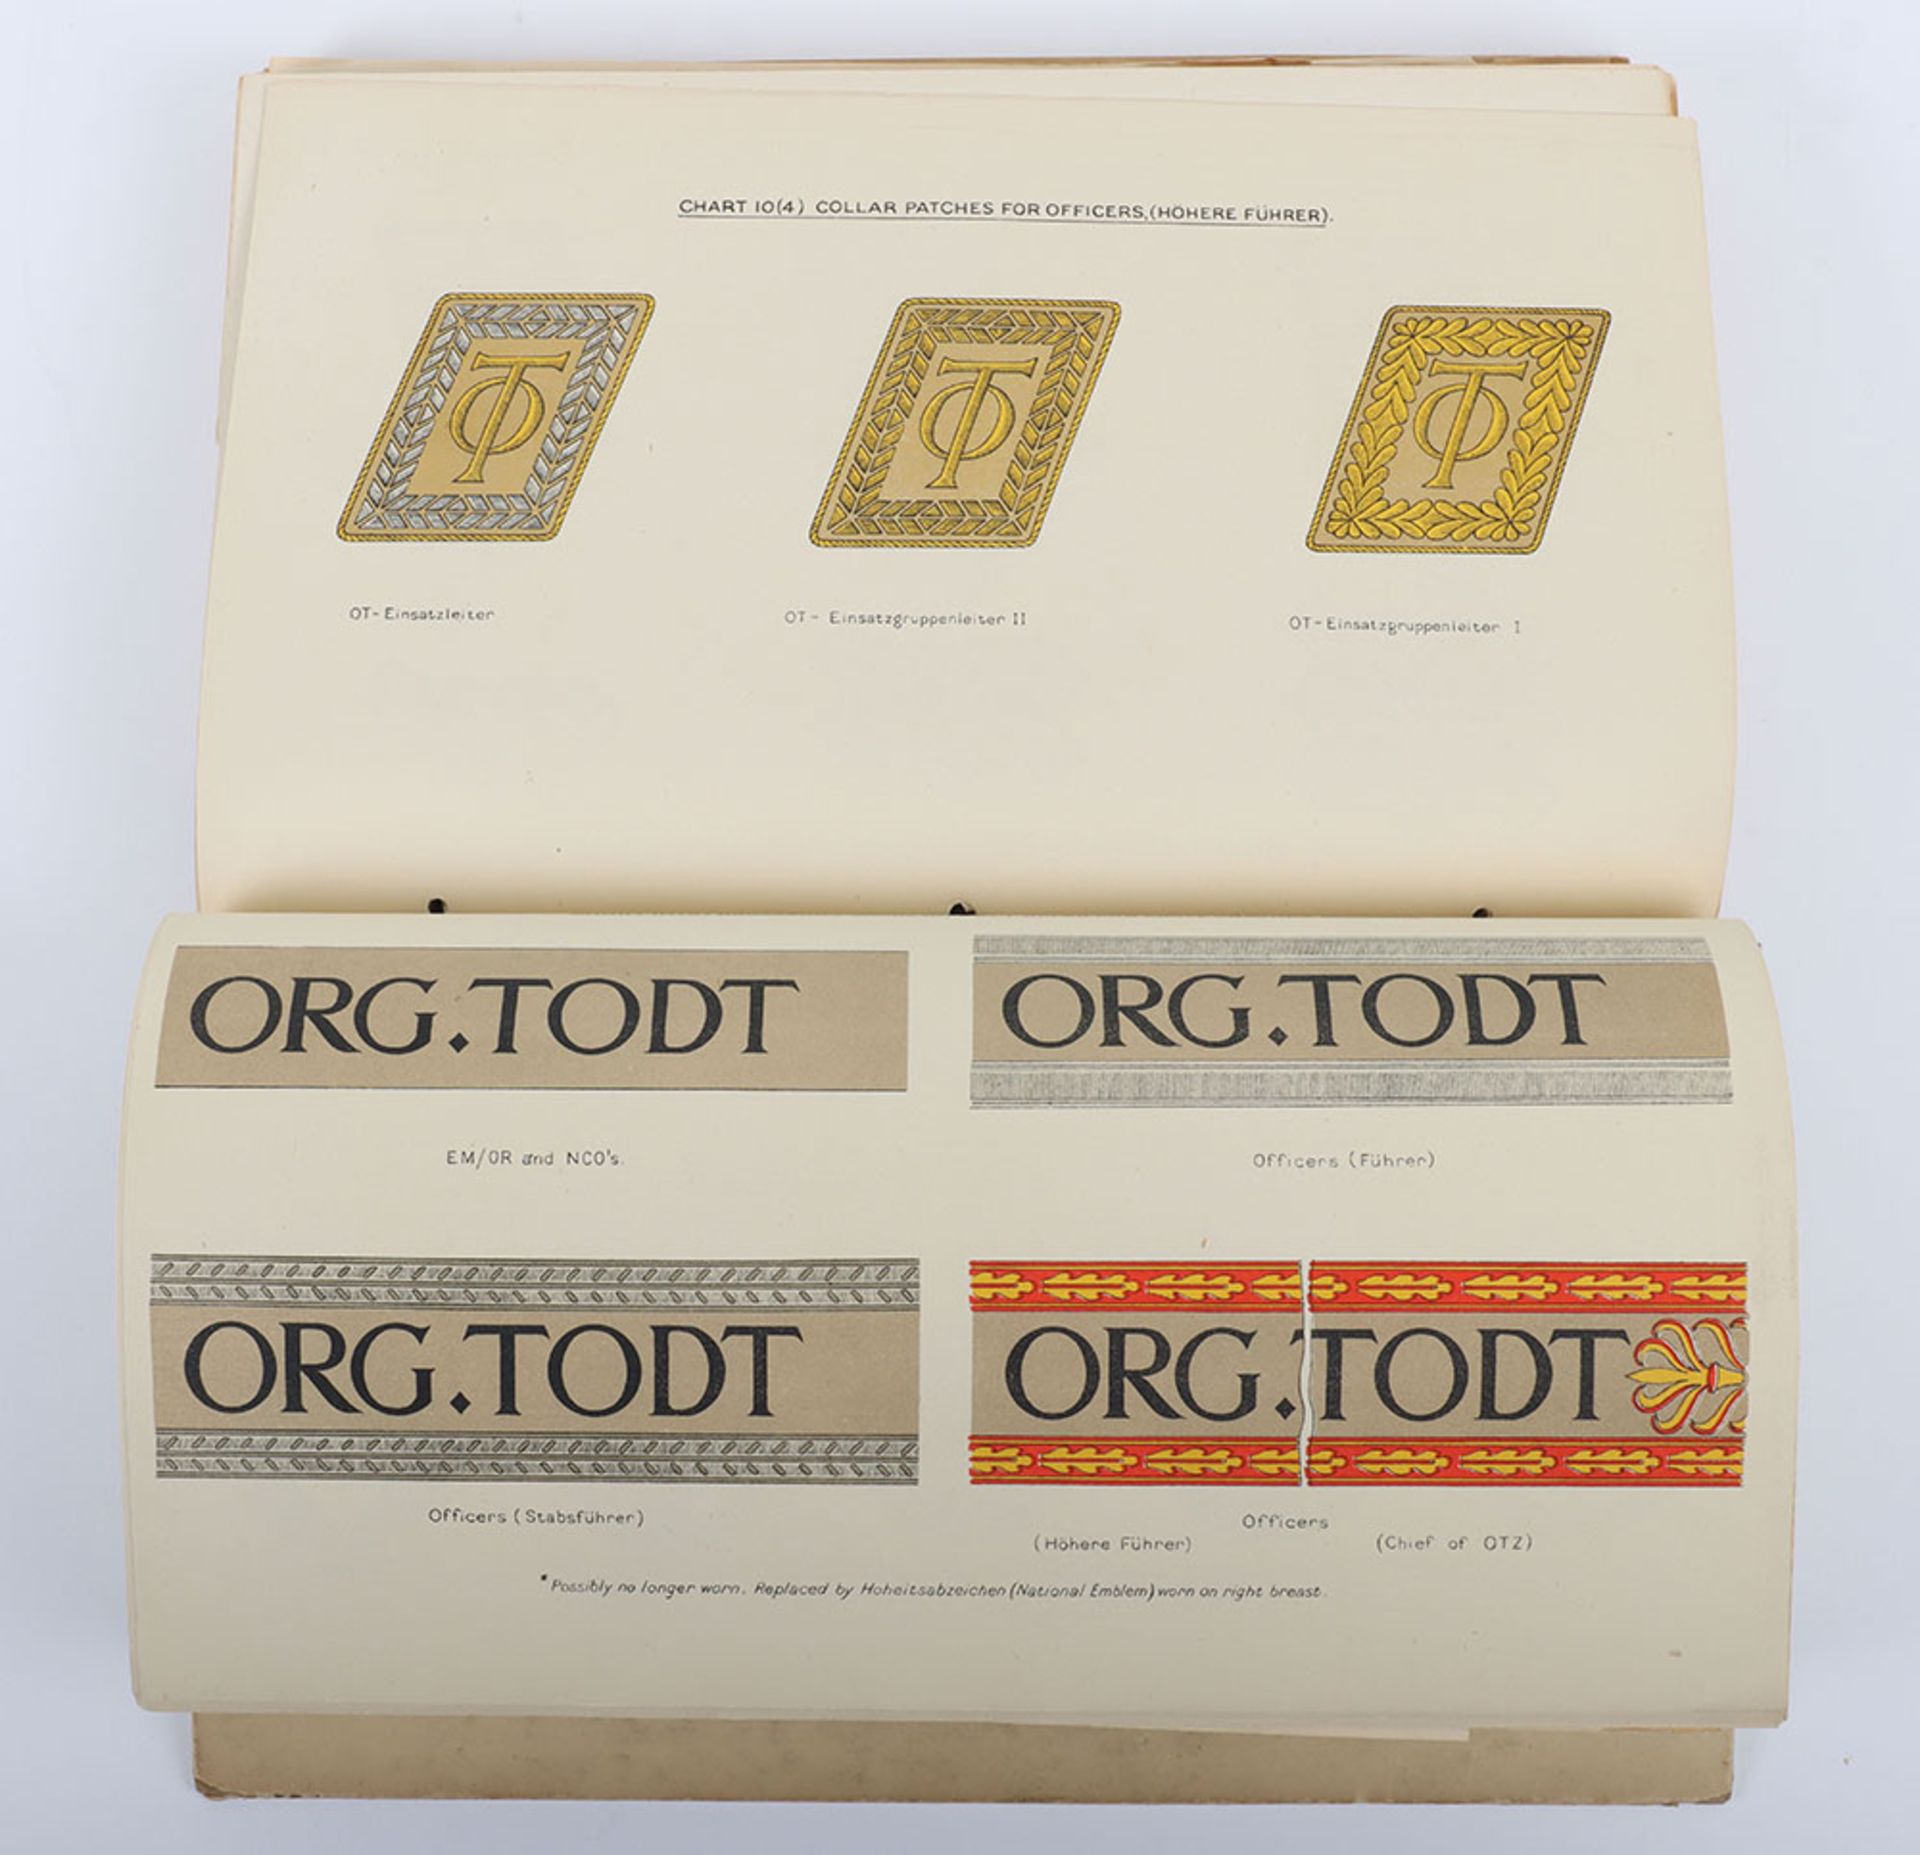 Handbook of the Organisation Todt (O.T.) MIRS London, March 1945. - Image 7 of 7